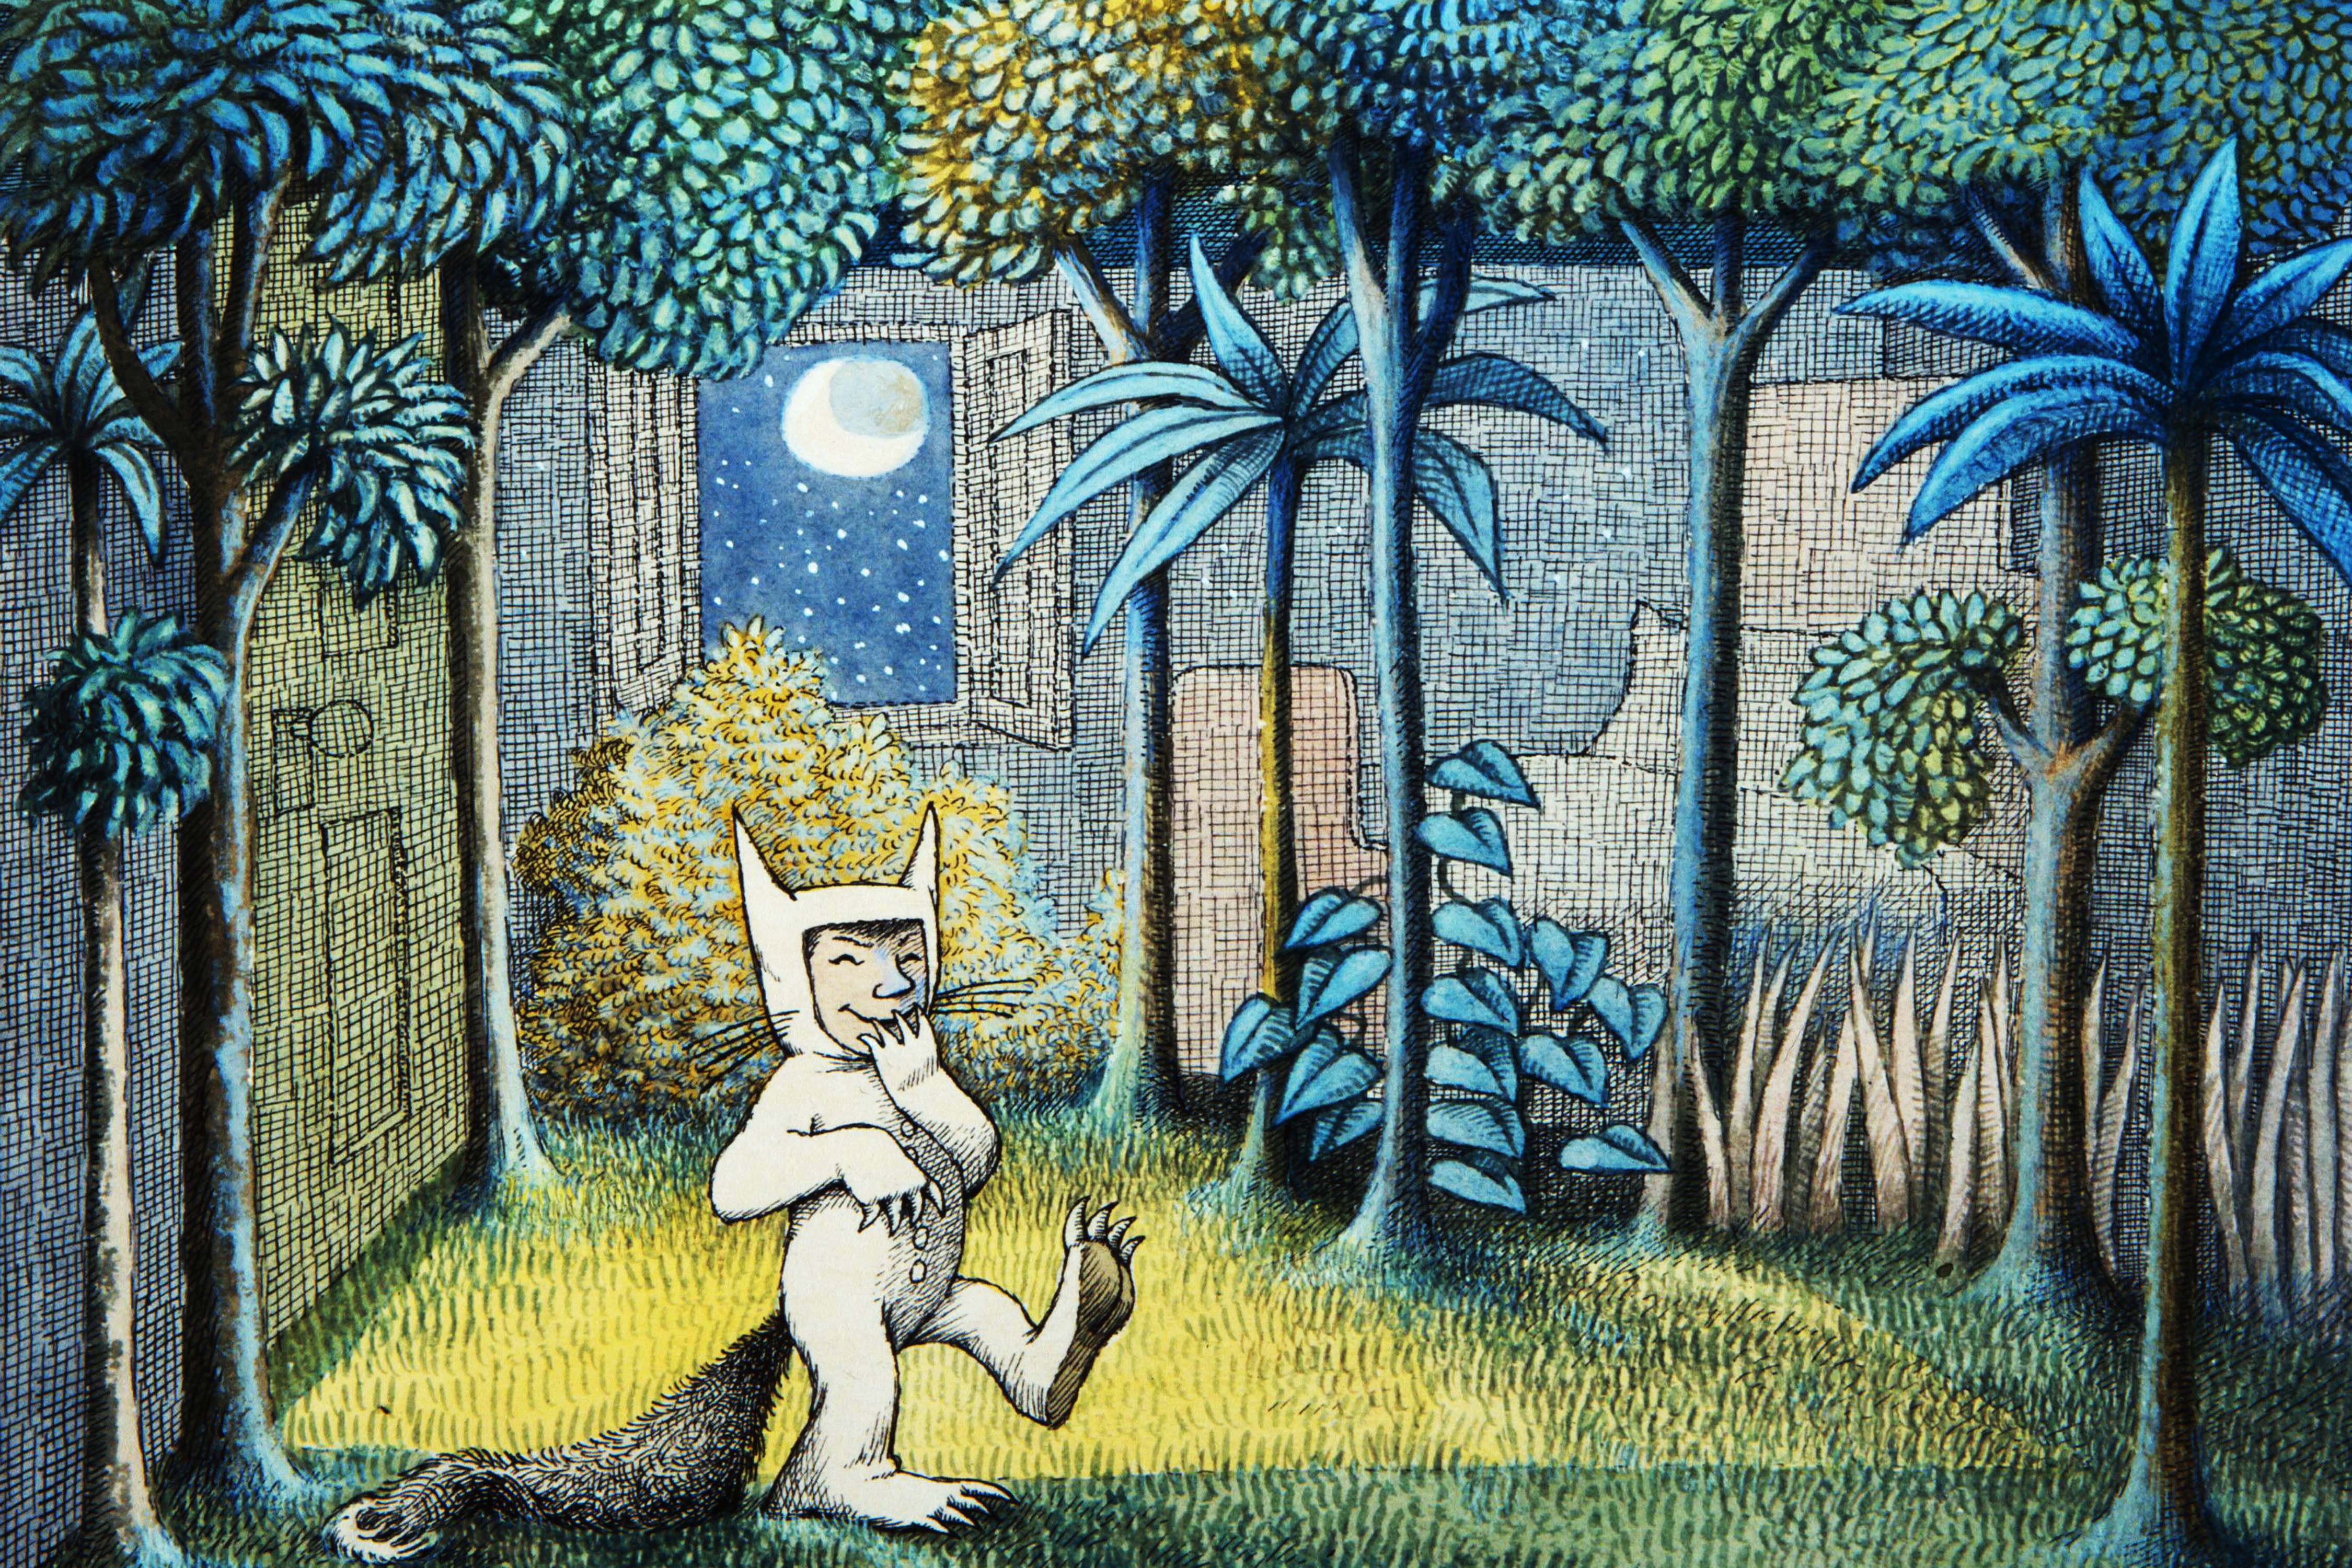 Where The Wild Things Are HD wallpapers, Desktop wallpaper - most viewed